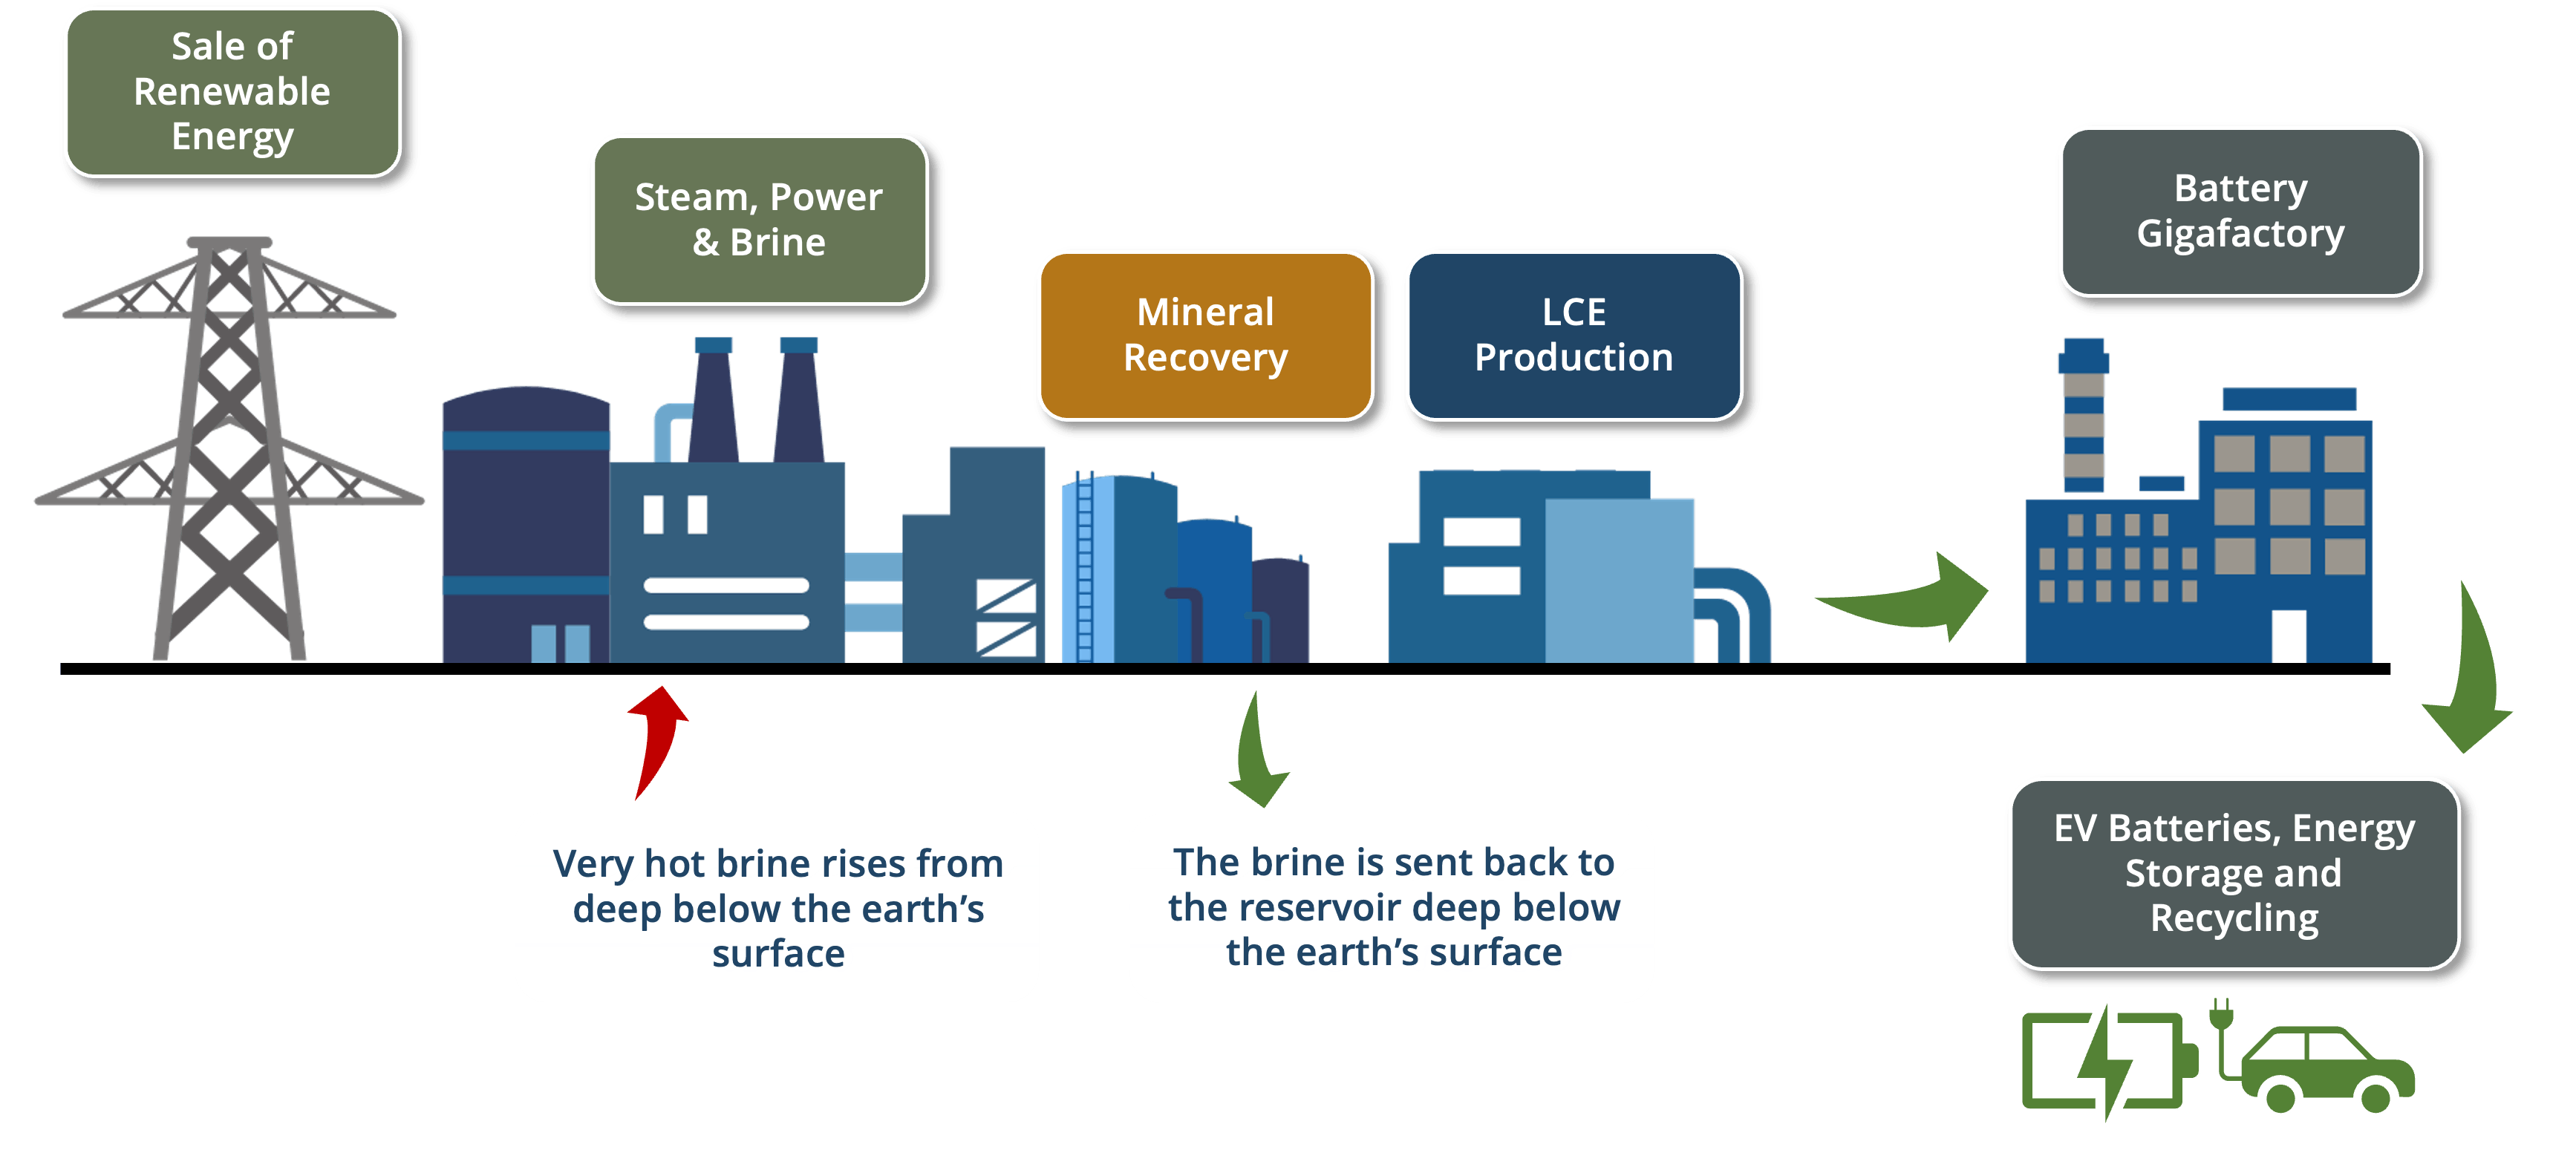 CTR's process for producing battery-grade lithium products